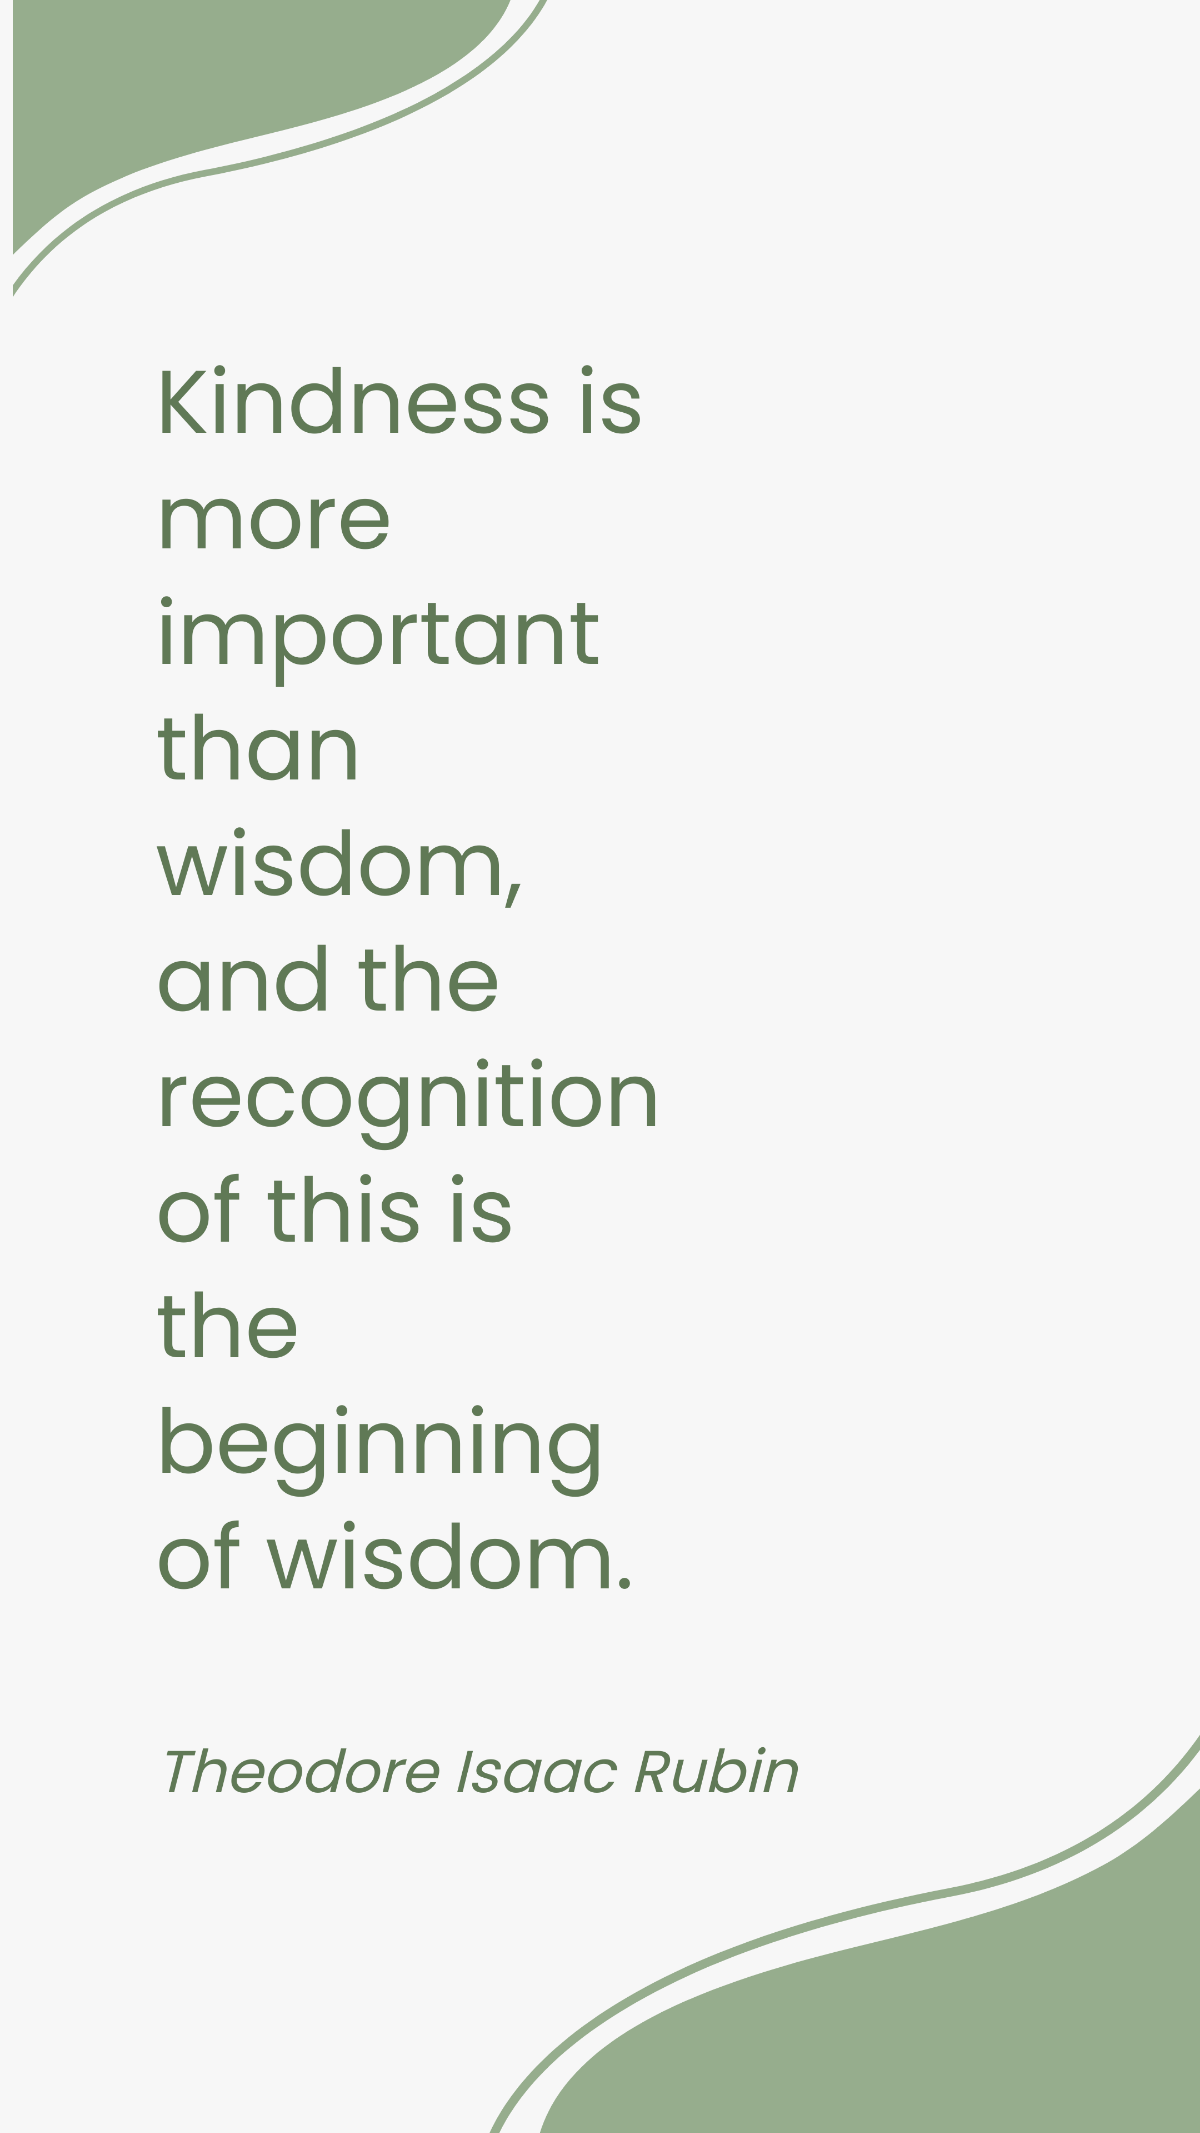 Theodore Isaac Rubin - Kindness is more important than wisdom, and the recognition of this is the beginning of wisdom.